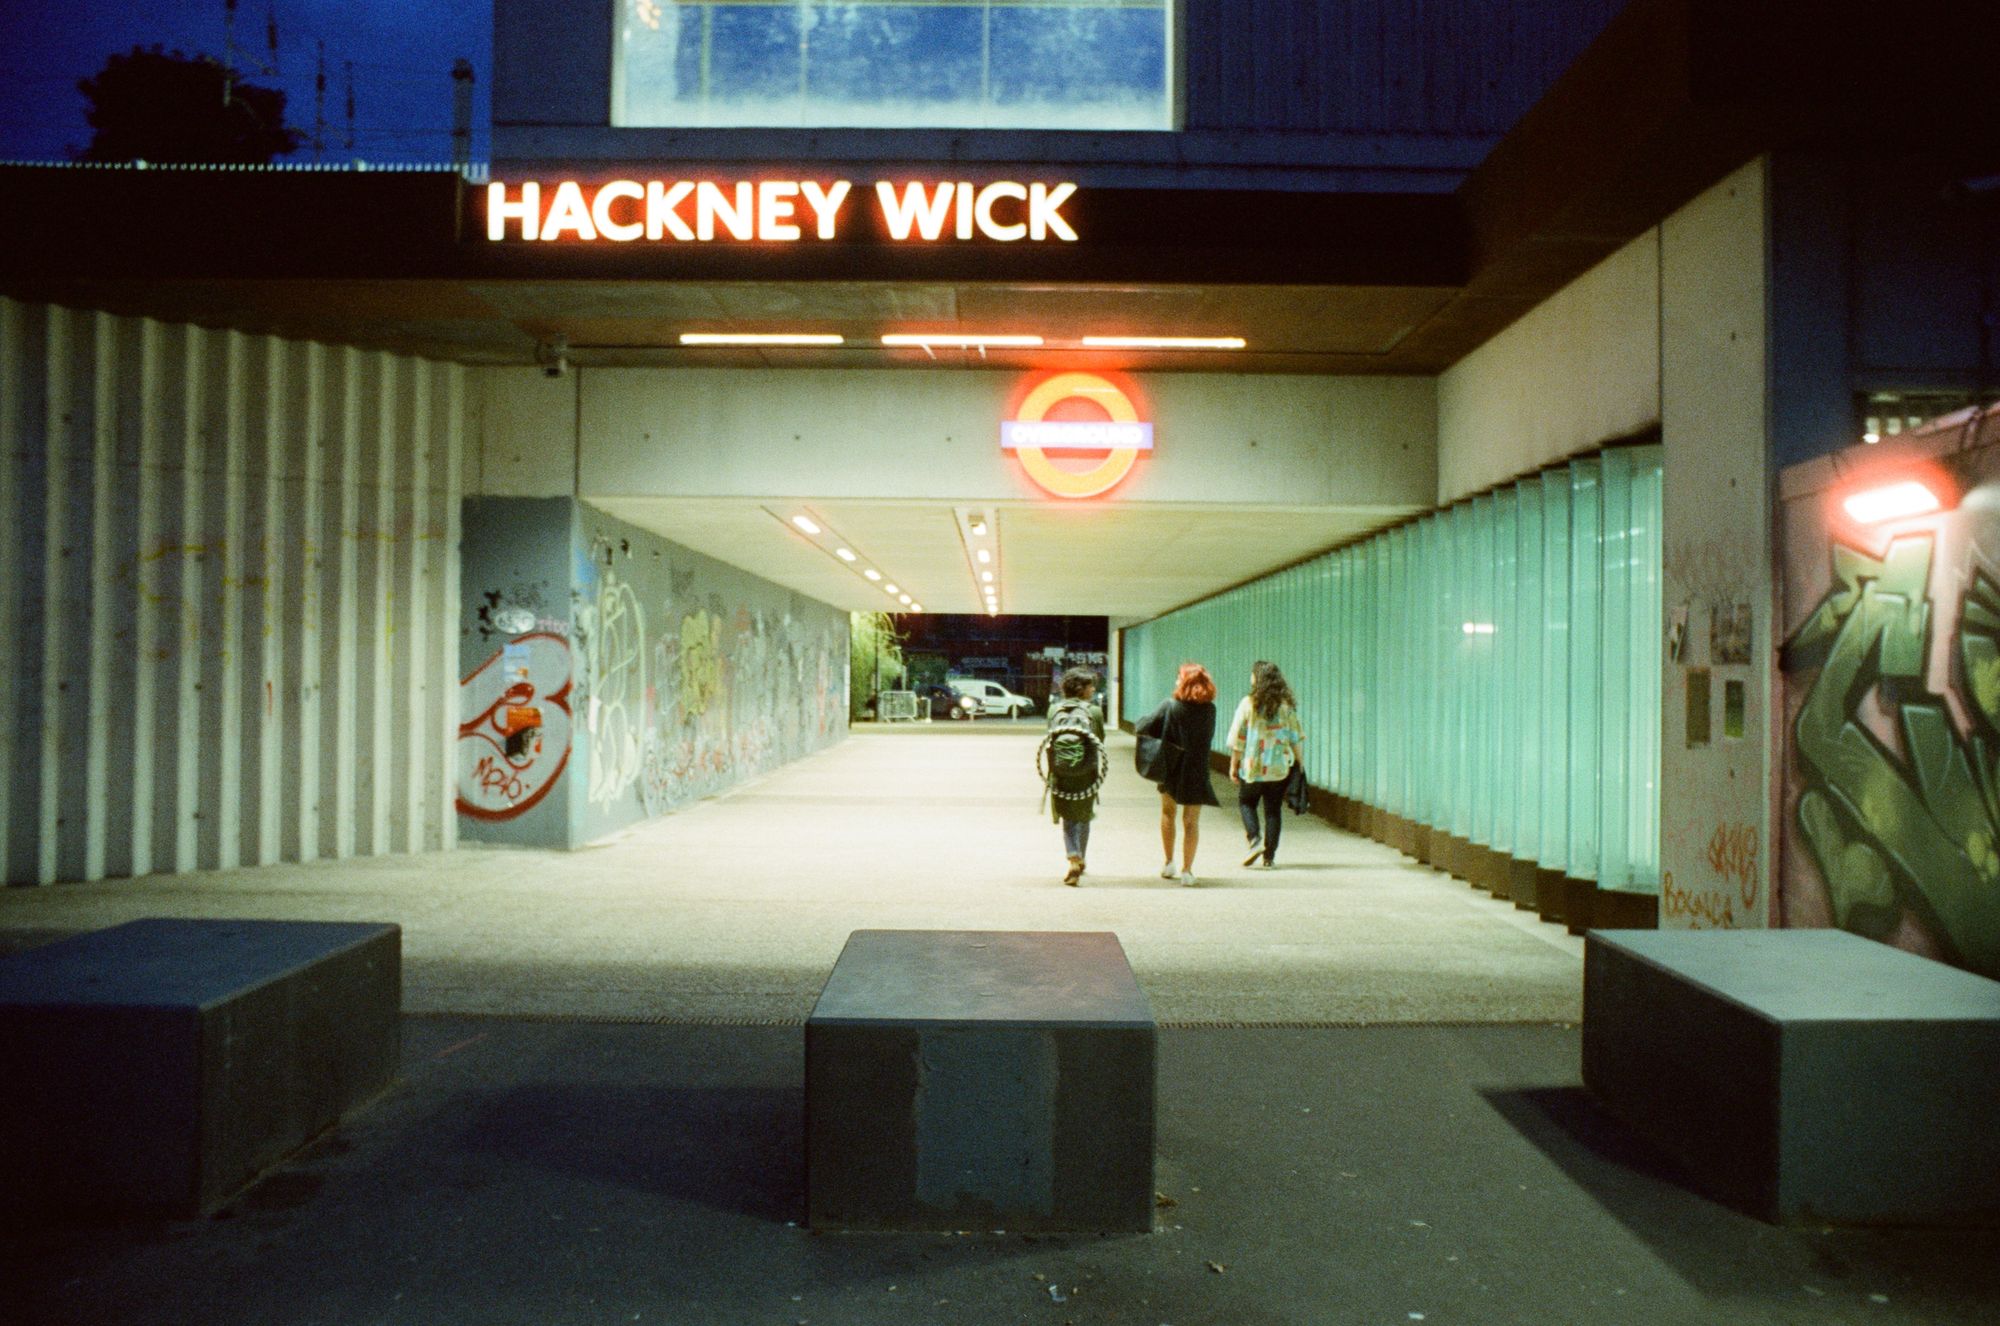 Three people walk away from camera through an underpass to Hackney Wick station. The illuminated lettering and roundel have a fizzy glow like a lightsaber.